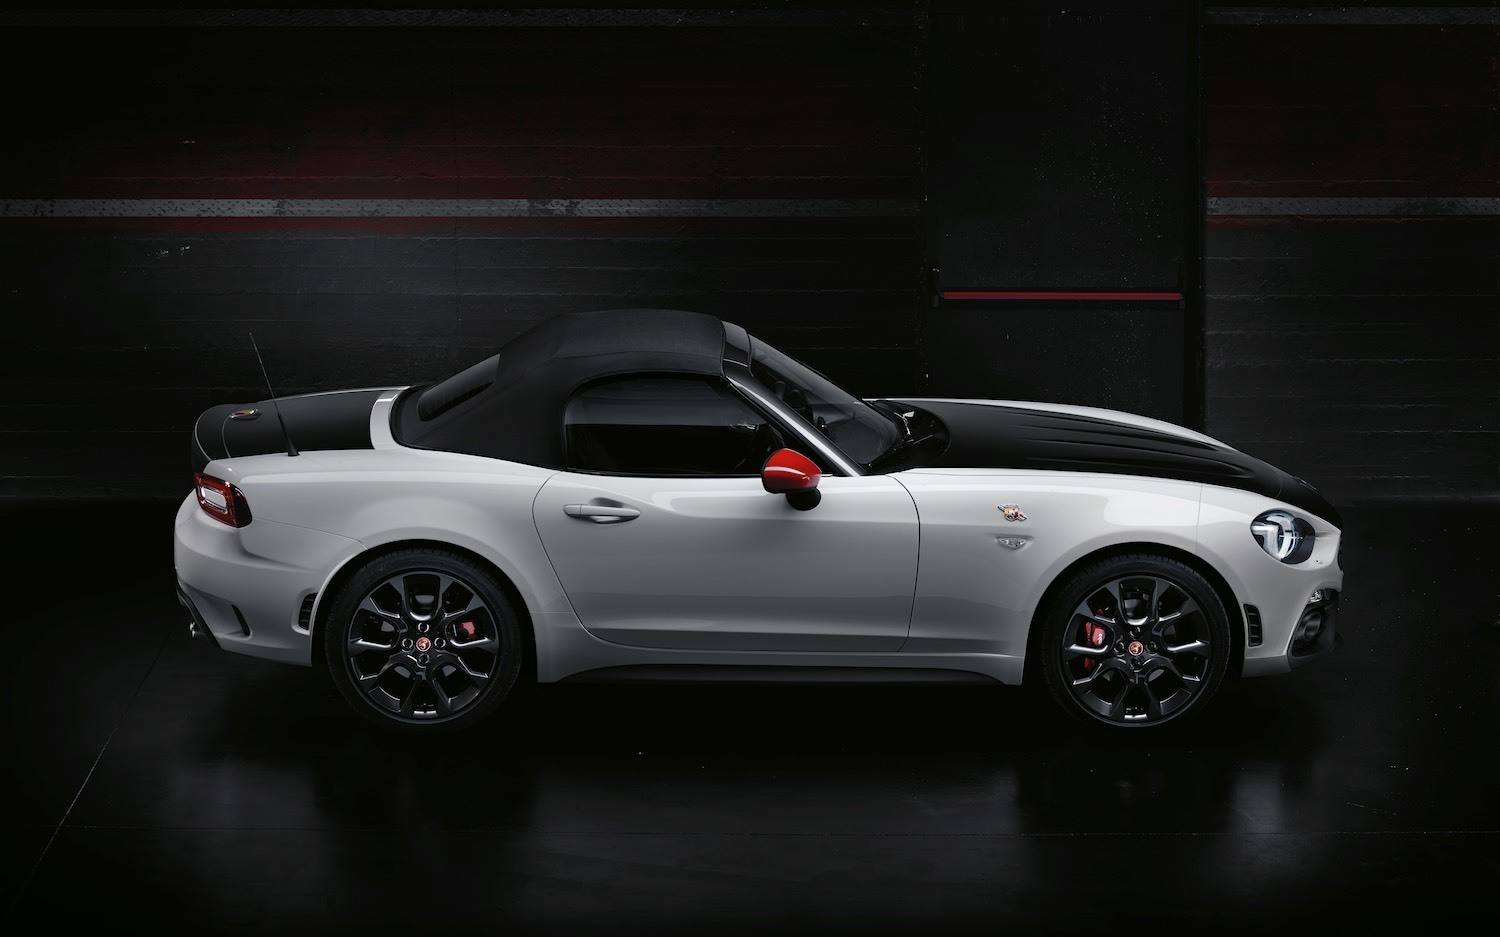 Jonathan Humphrey reviews the Abarth 124 Spider for Drive 2